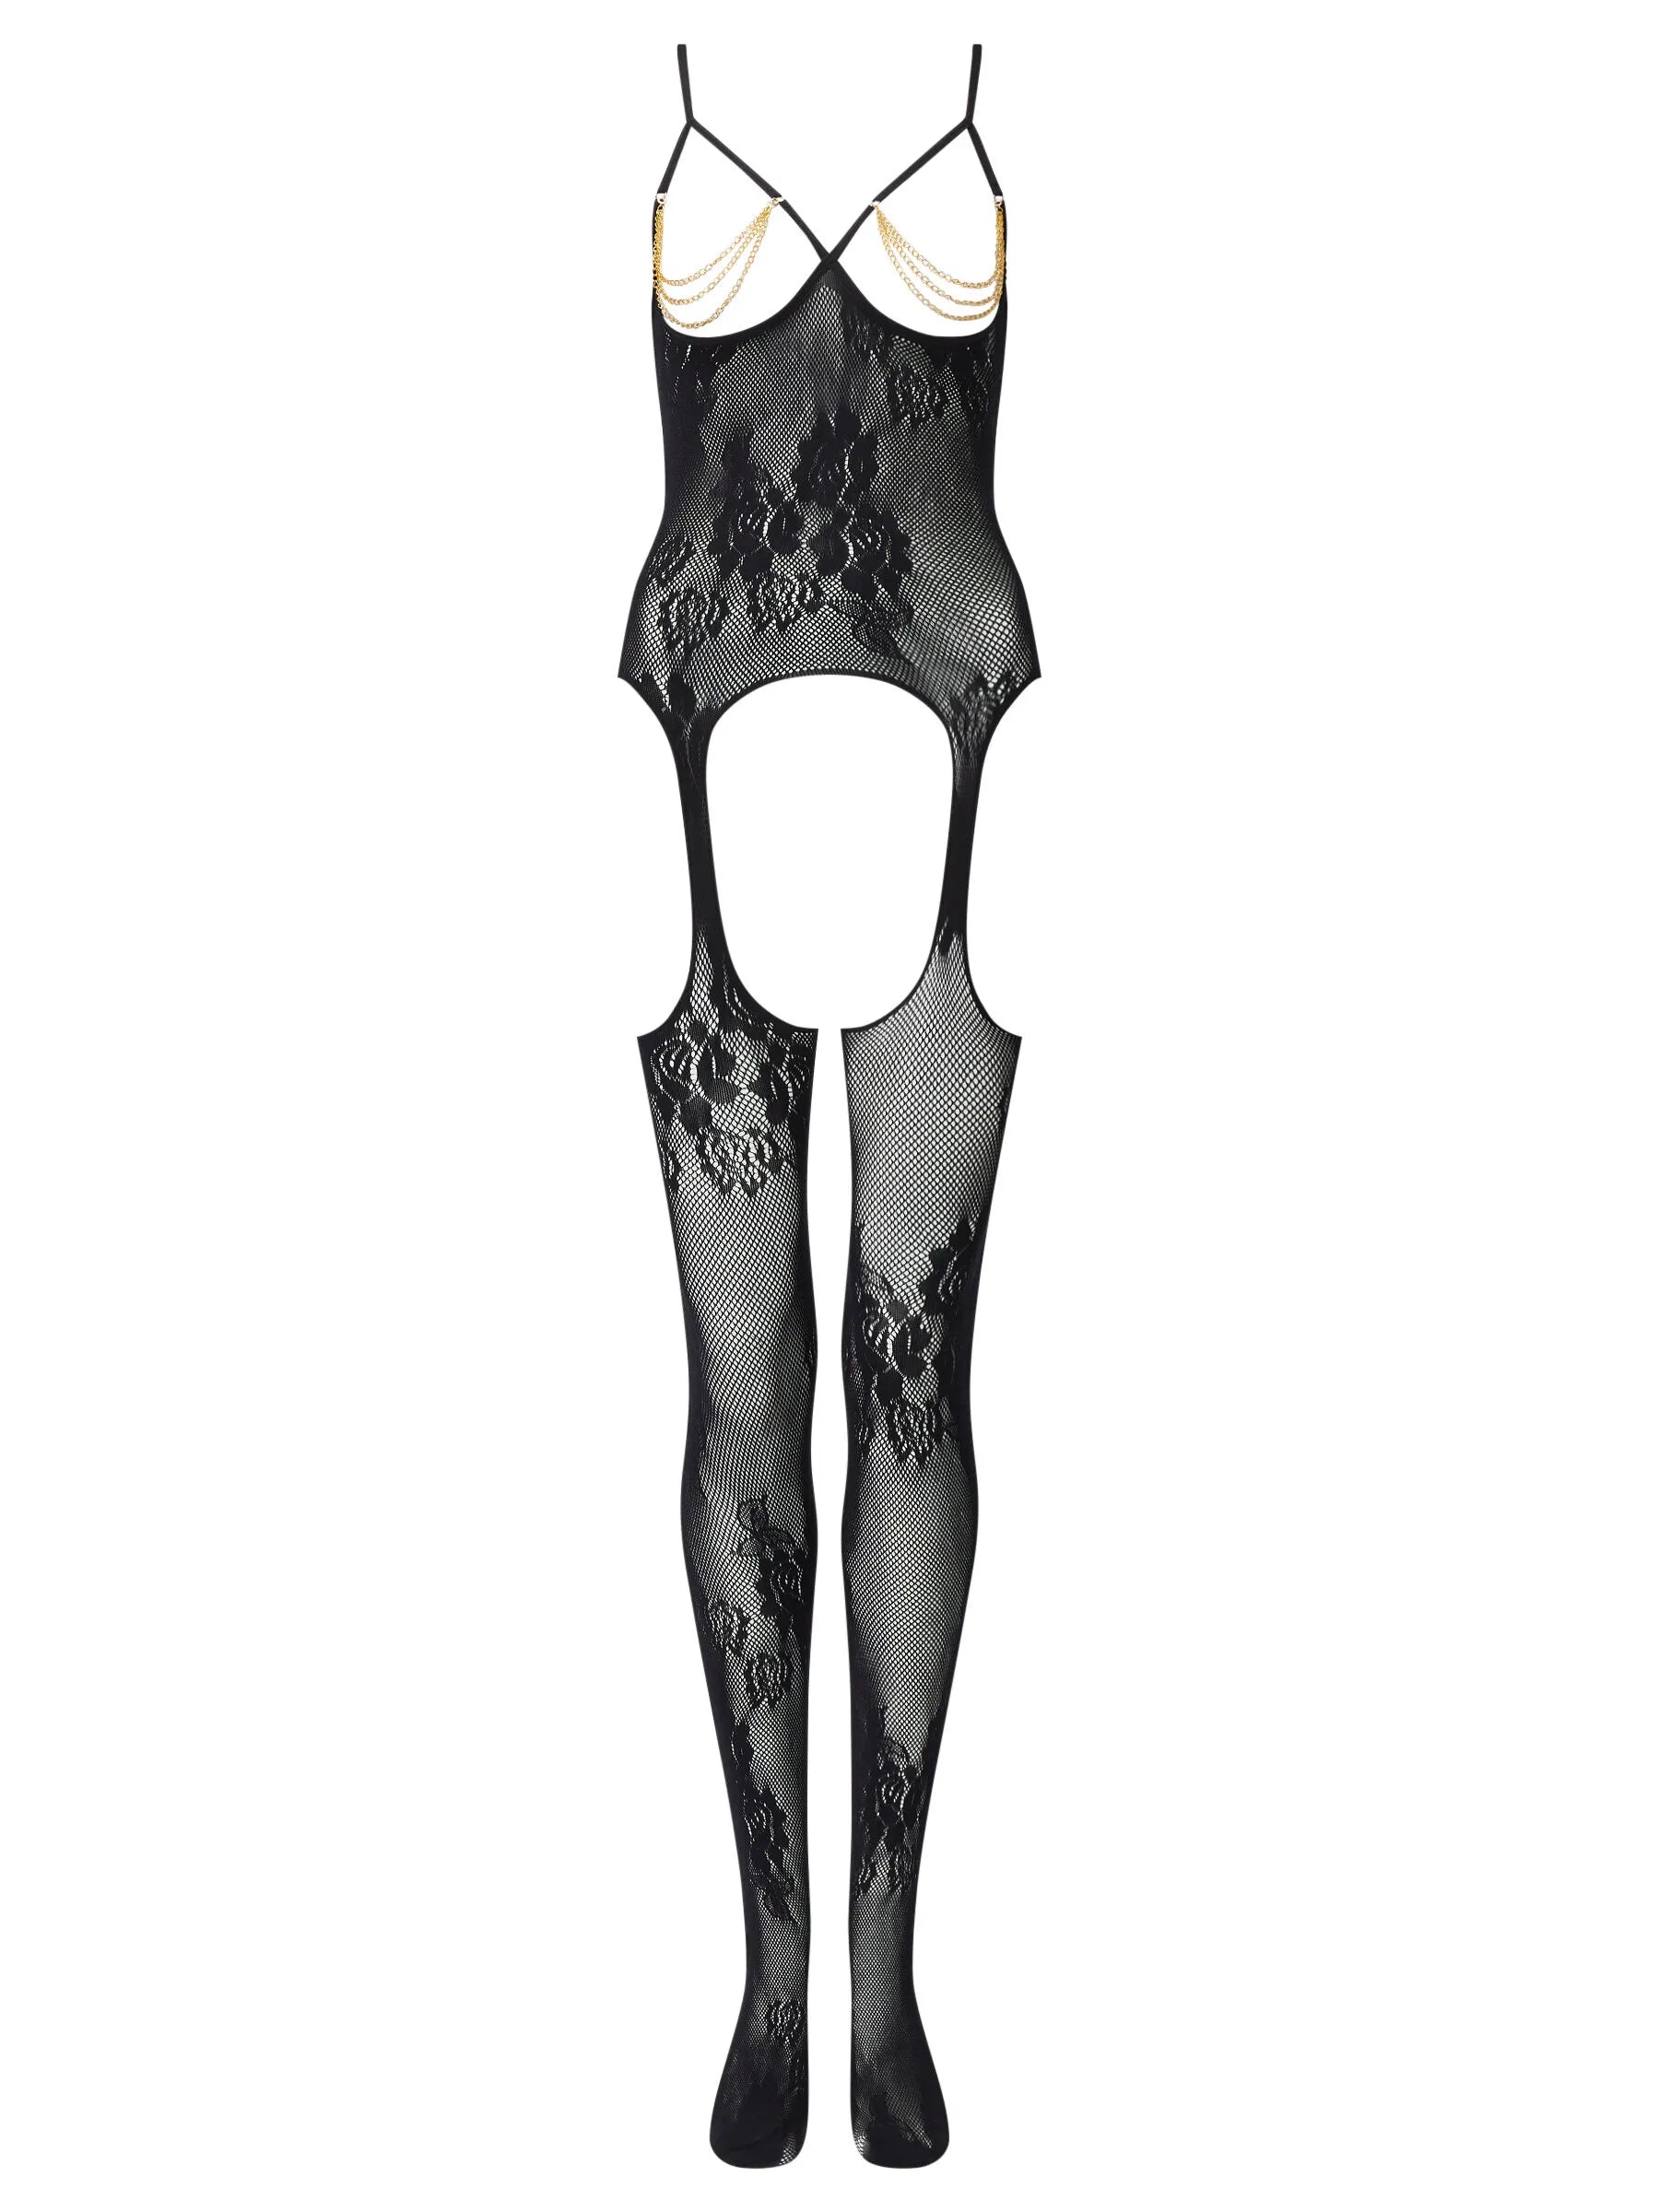 Electrifying Crotchless Bodystocking From Ann Summers, Image 03